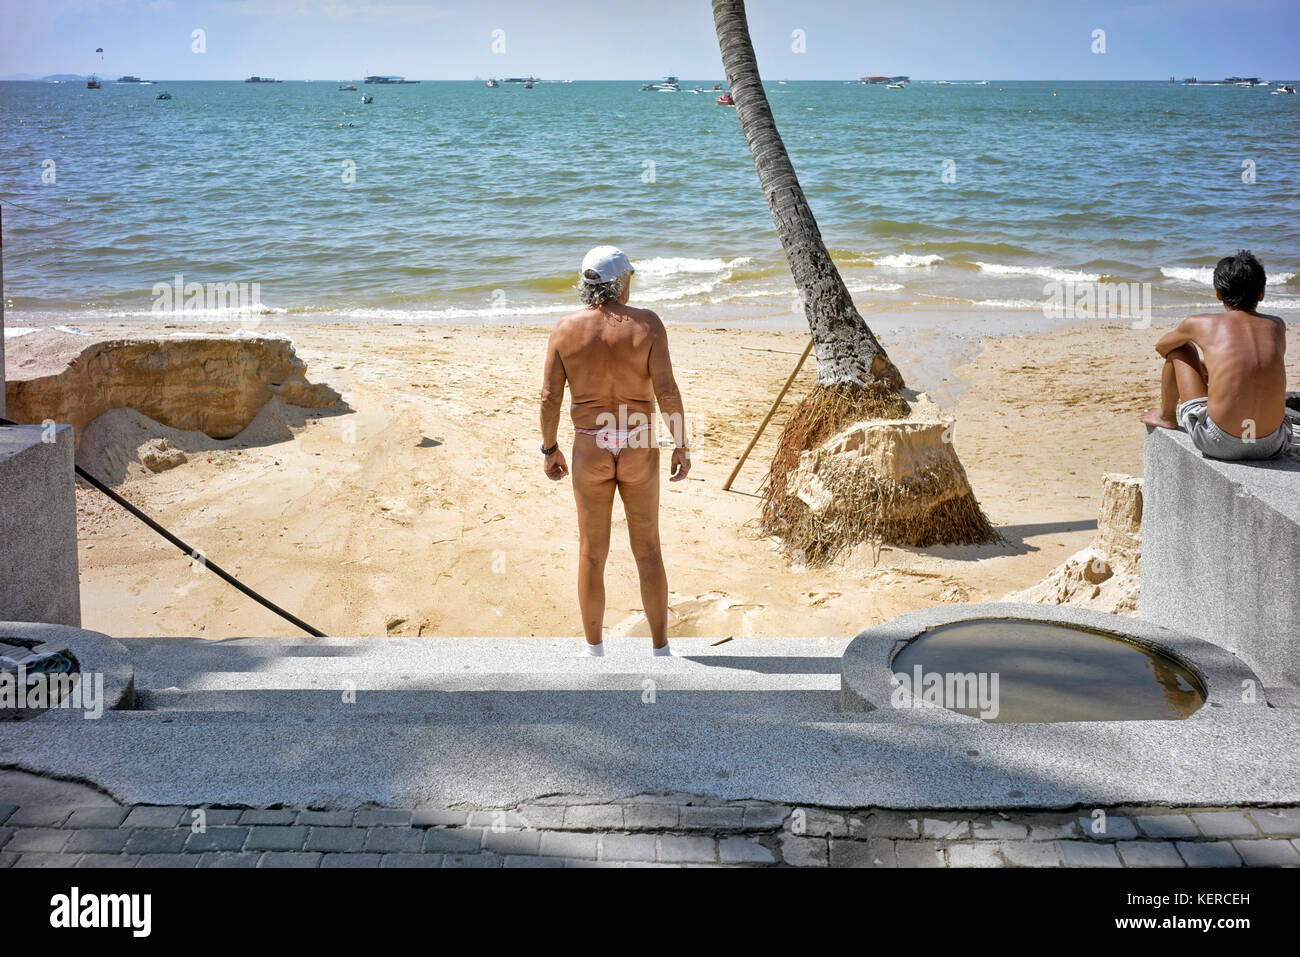 Man with rolled up swimming trunks sunbathing at Pattaya beach, Thailand, Southeast Asia. Stock Photo